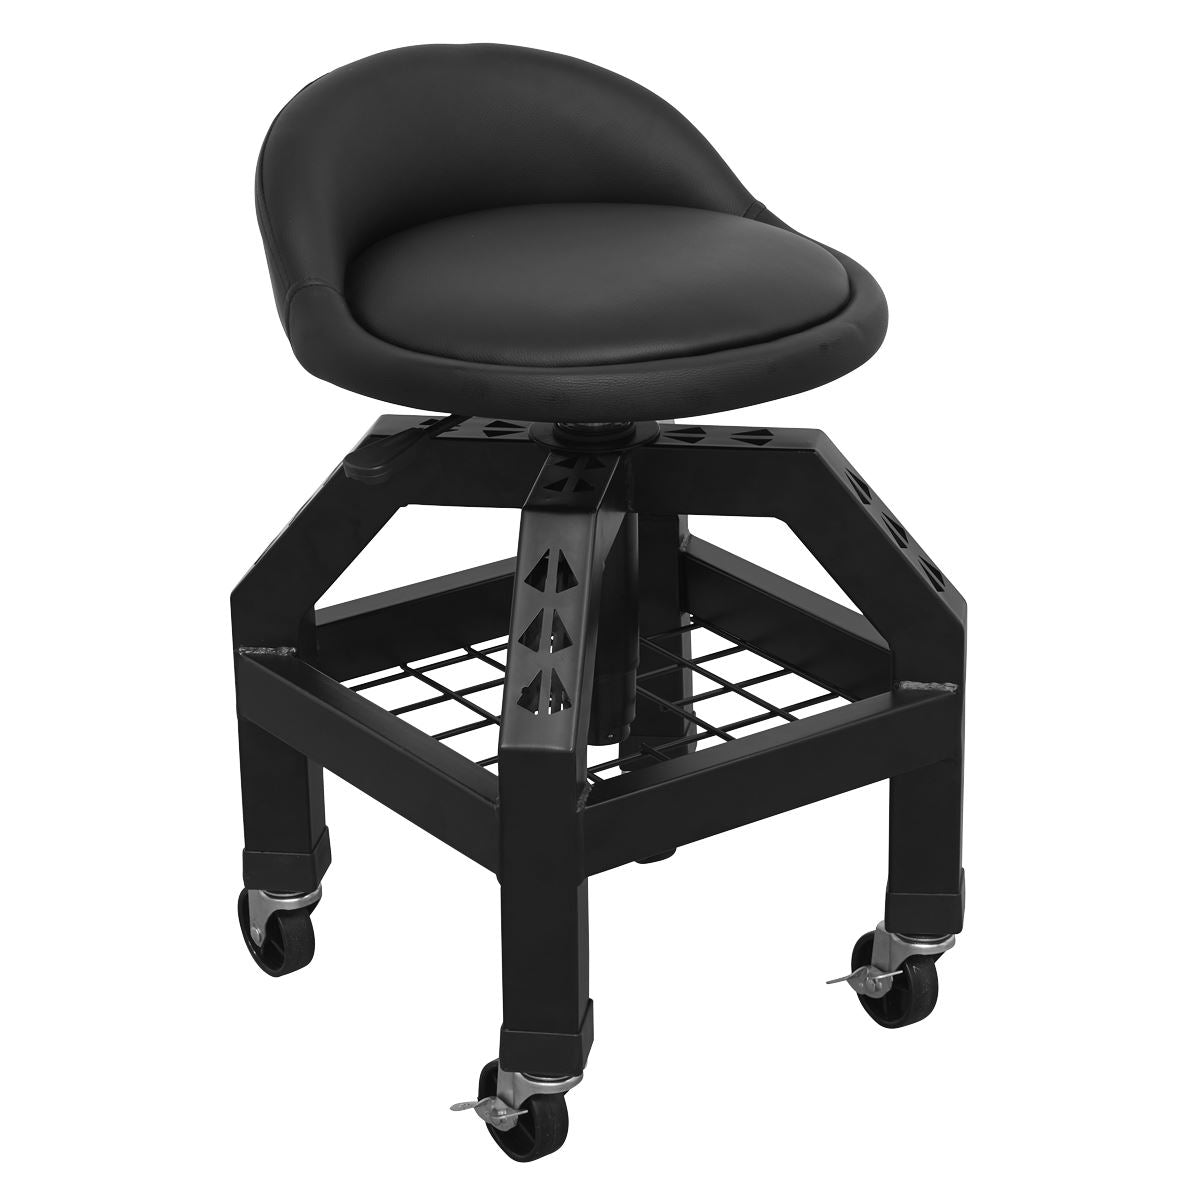 Sealey Premier Industrial Creeper Stool Pneumatic with Adjustable Height Swivel Seat & Back Rest